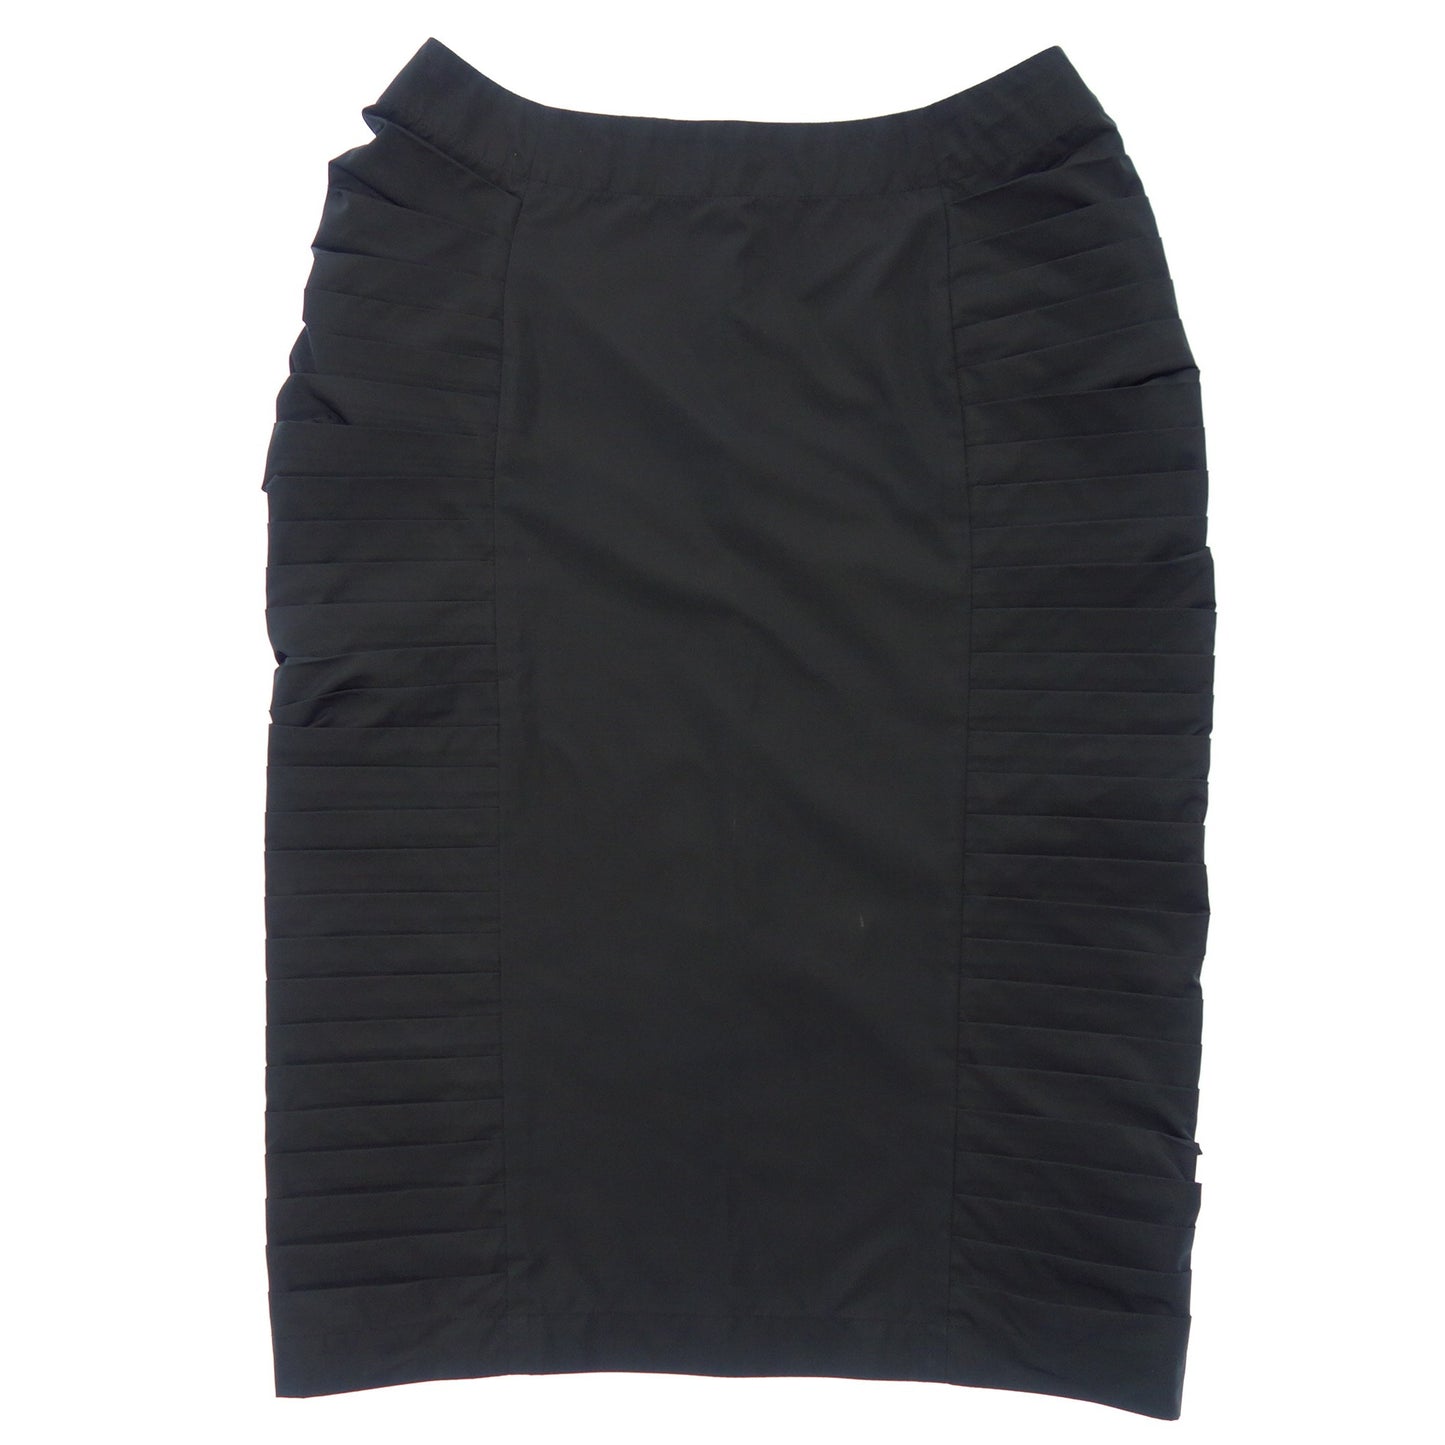 Good condition◆Issey Miyake Skirt Side Pleats Sample Product Women's Black ISSEY MIYAKE [AFB6] 